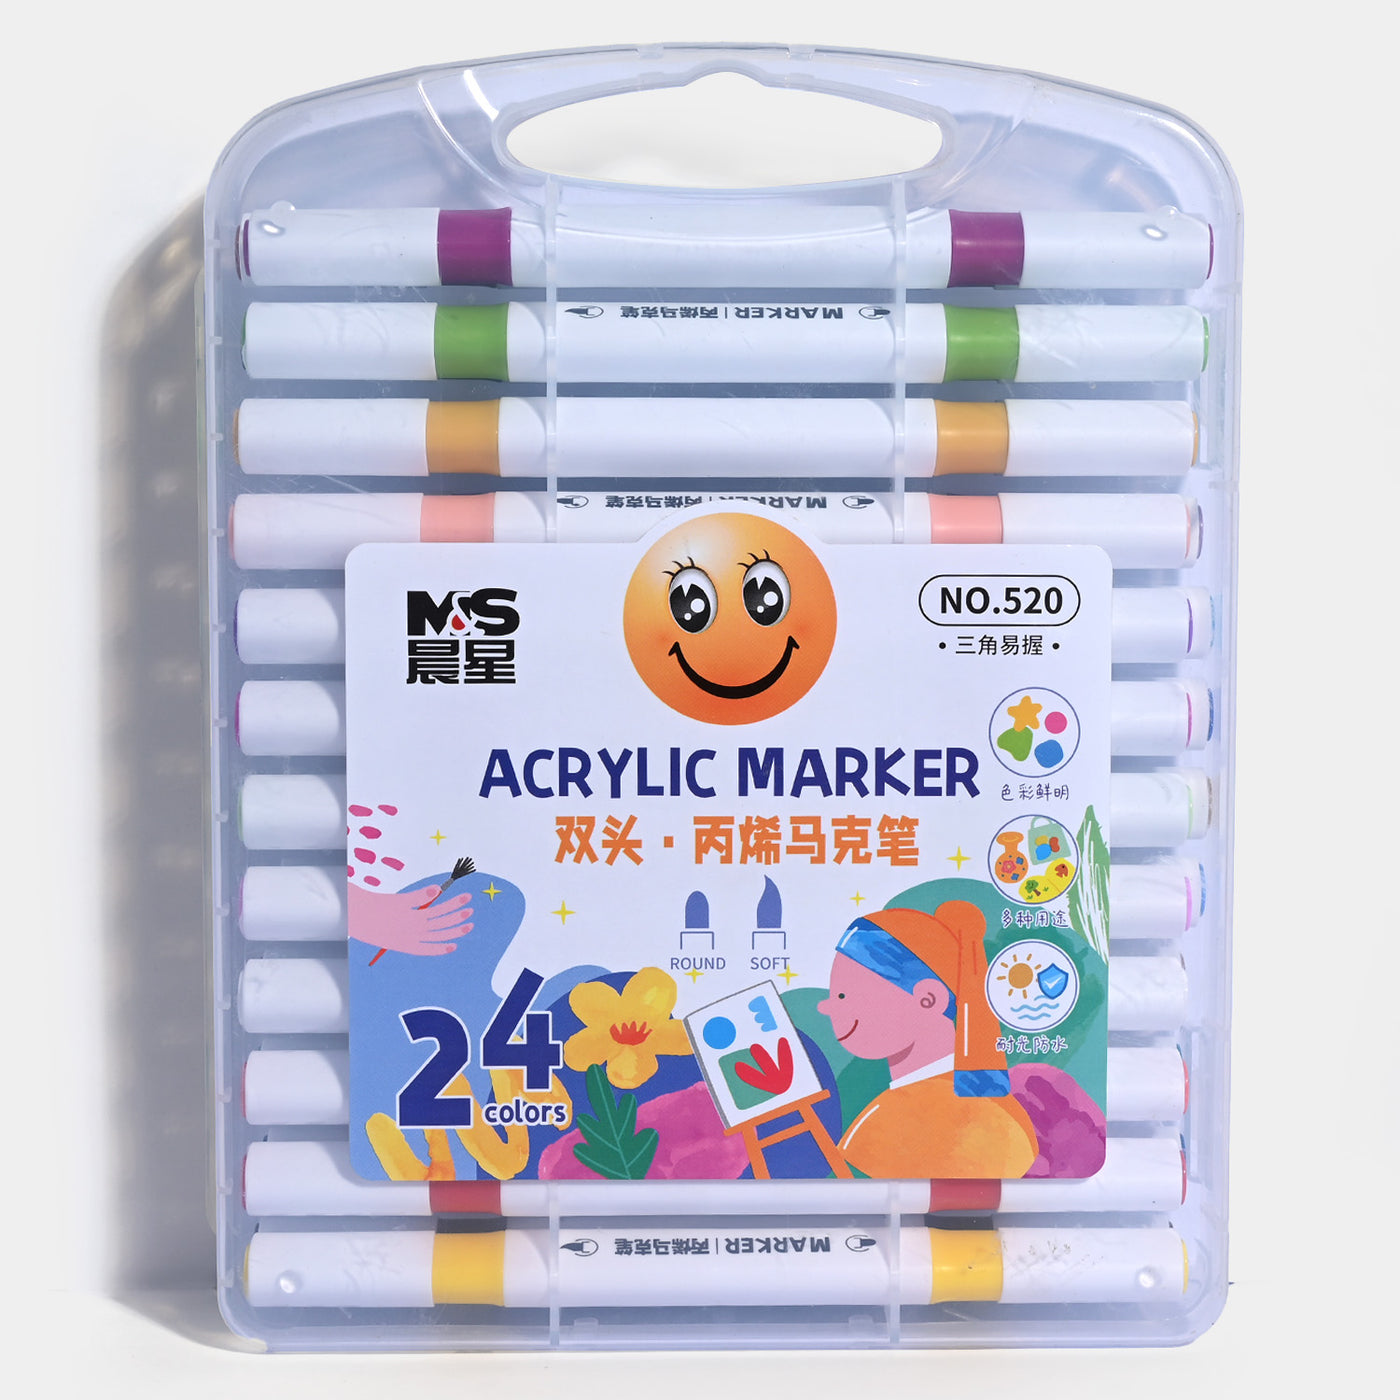 DOUBLE SIDED MARKER MULTICOLOR 24 PCS